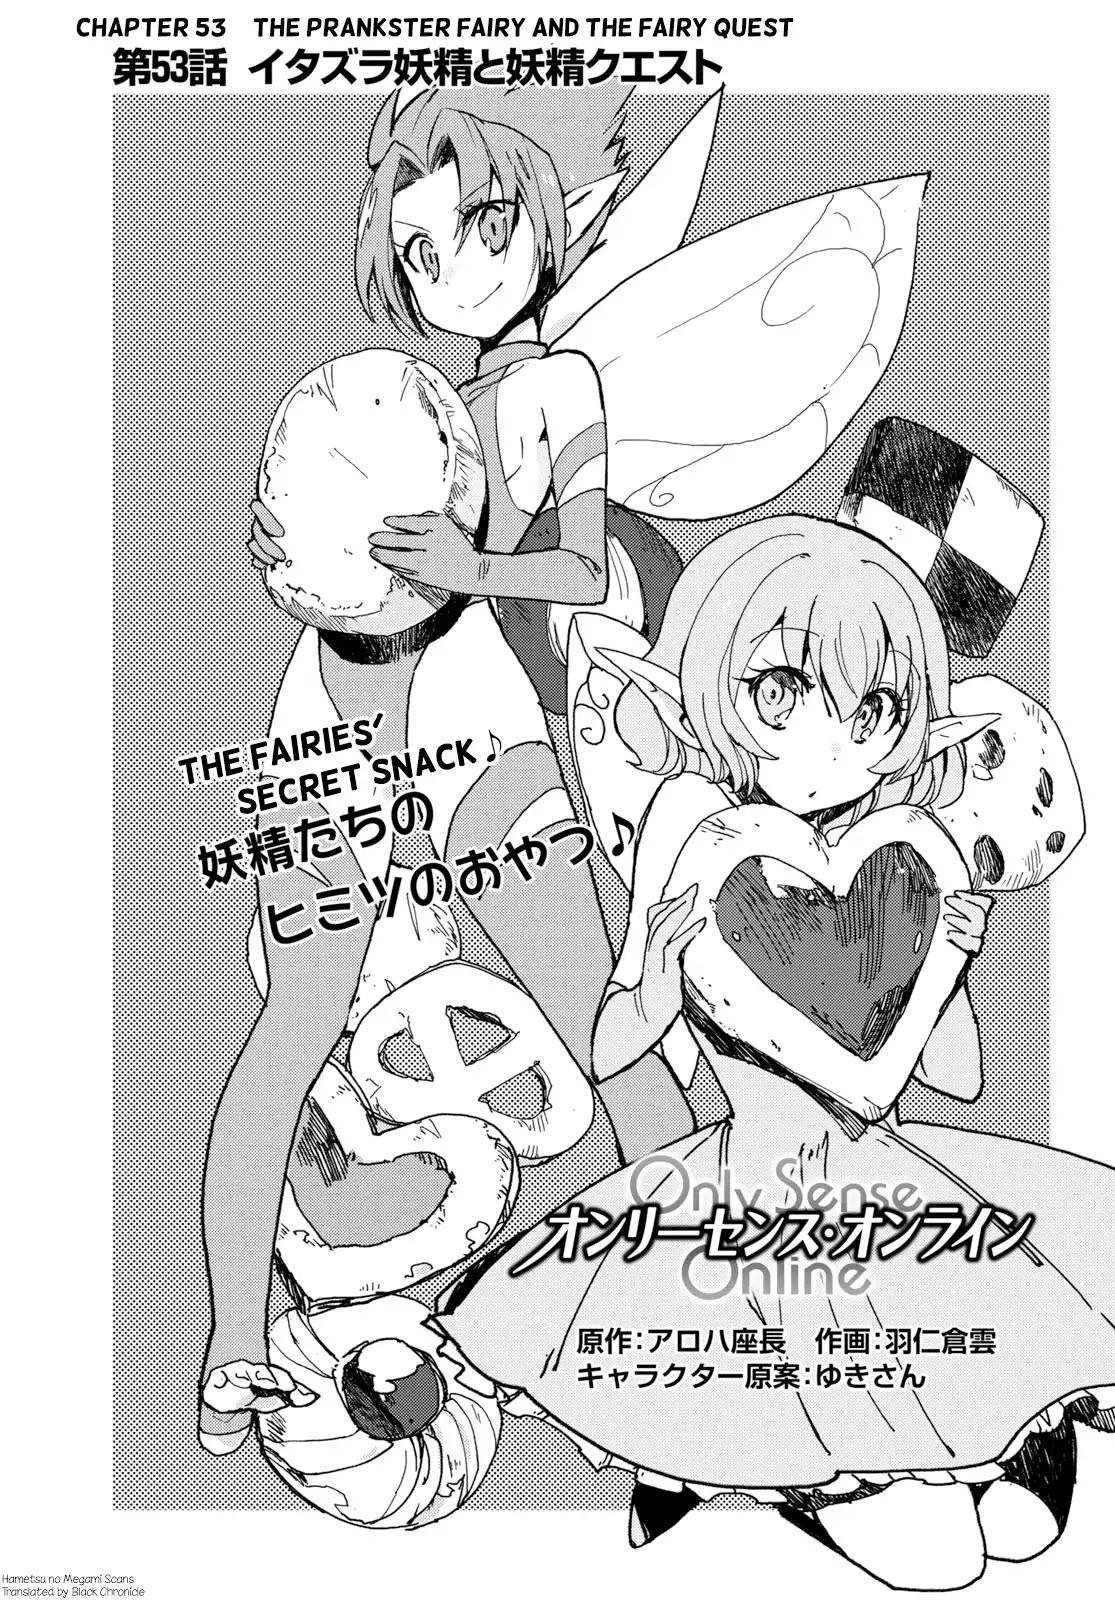 Only Sense Online Vol.9 Chapter 53: The Pranksters Fairy and The Fairy Quest